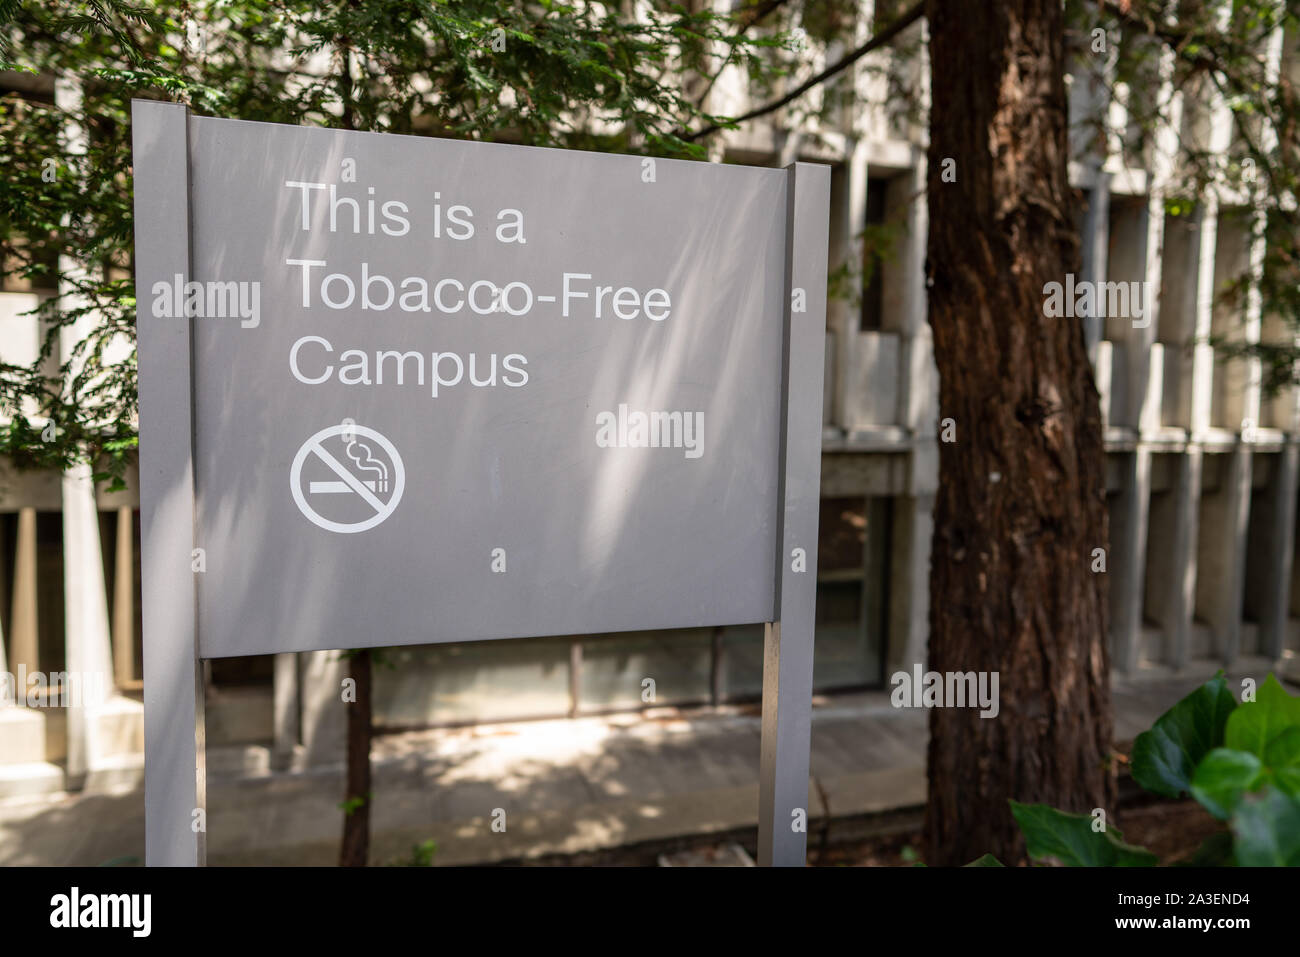 This is a tobacco-free campus sign with a crossed out cigarette symbol Stock Photo